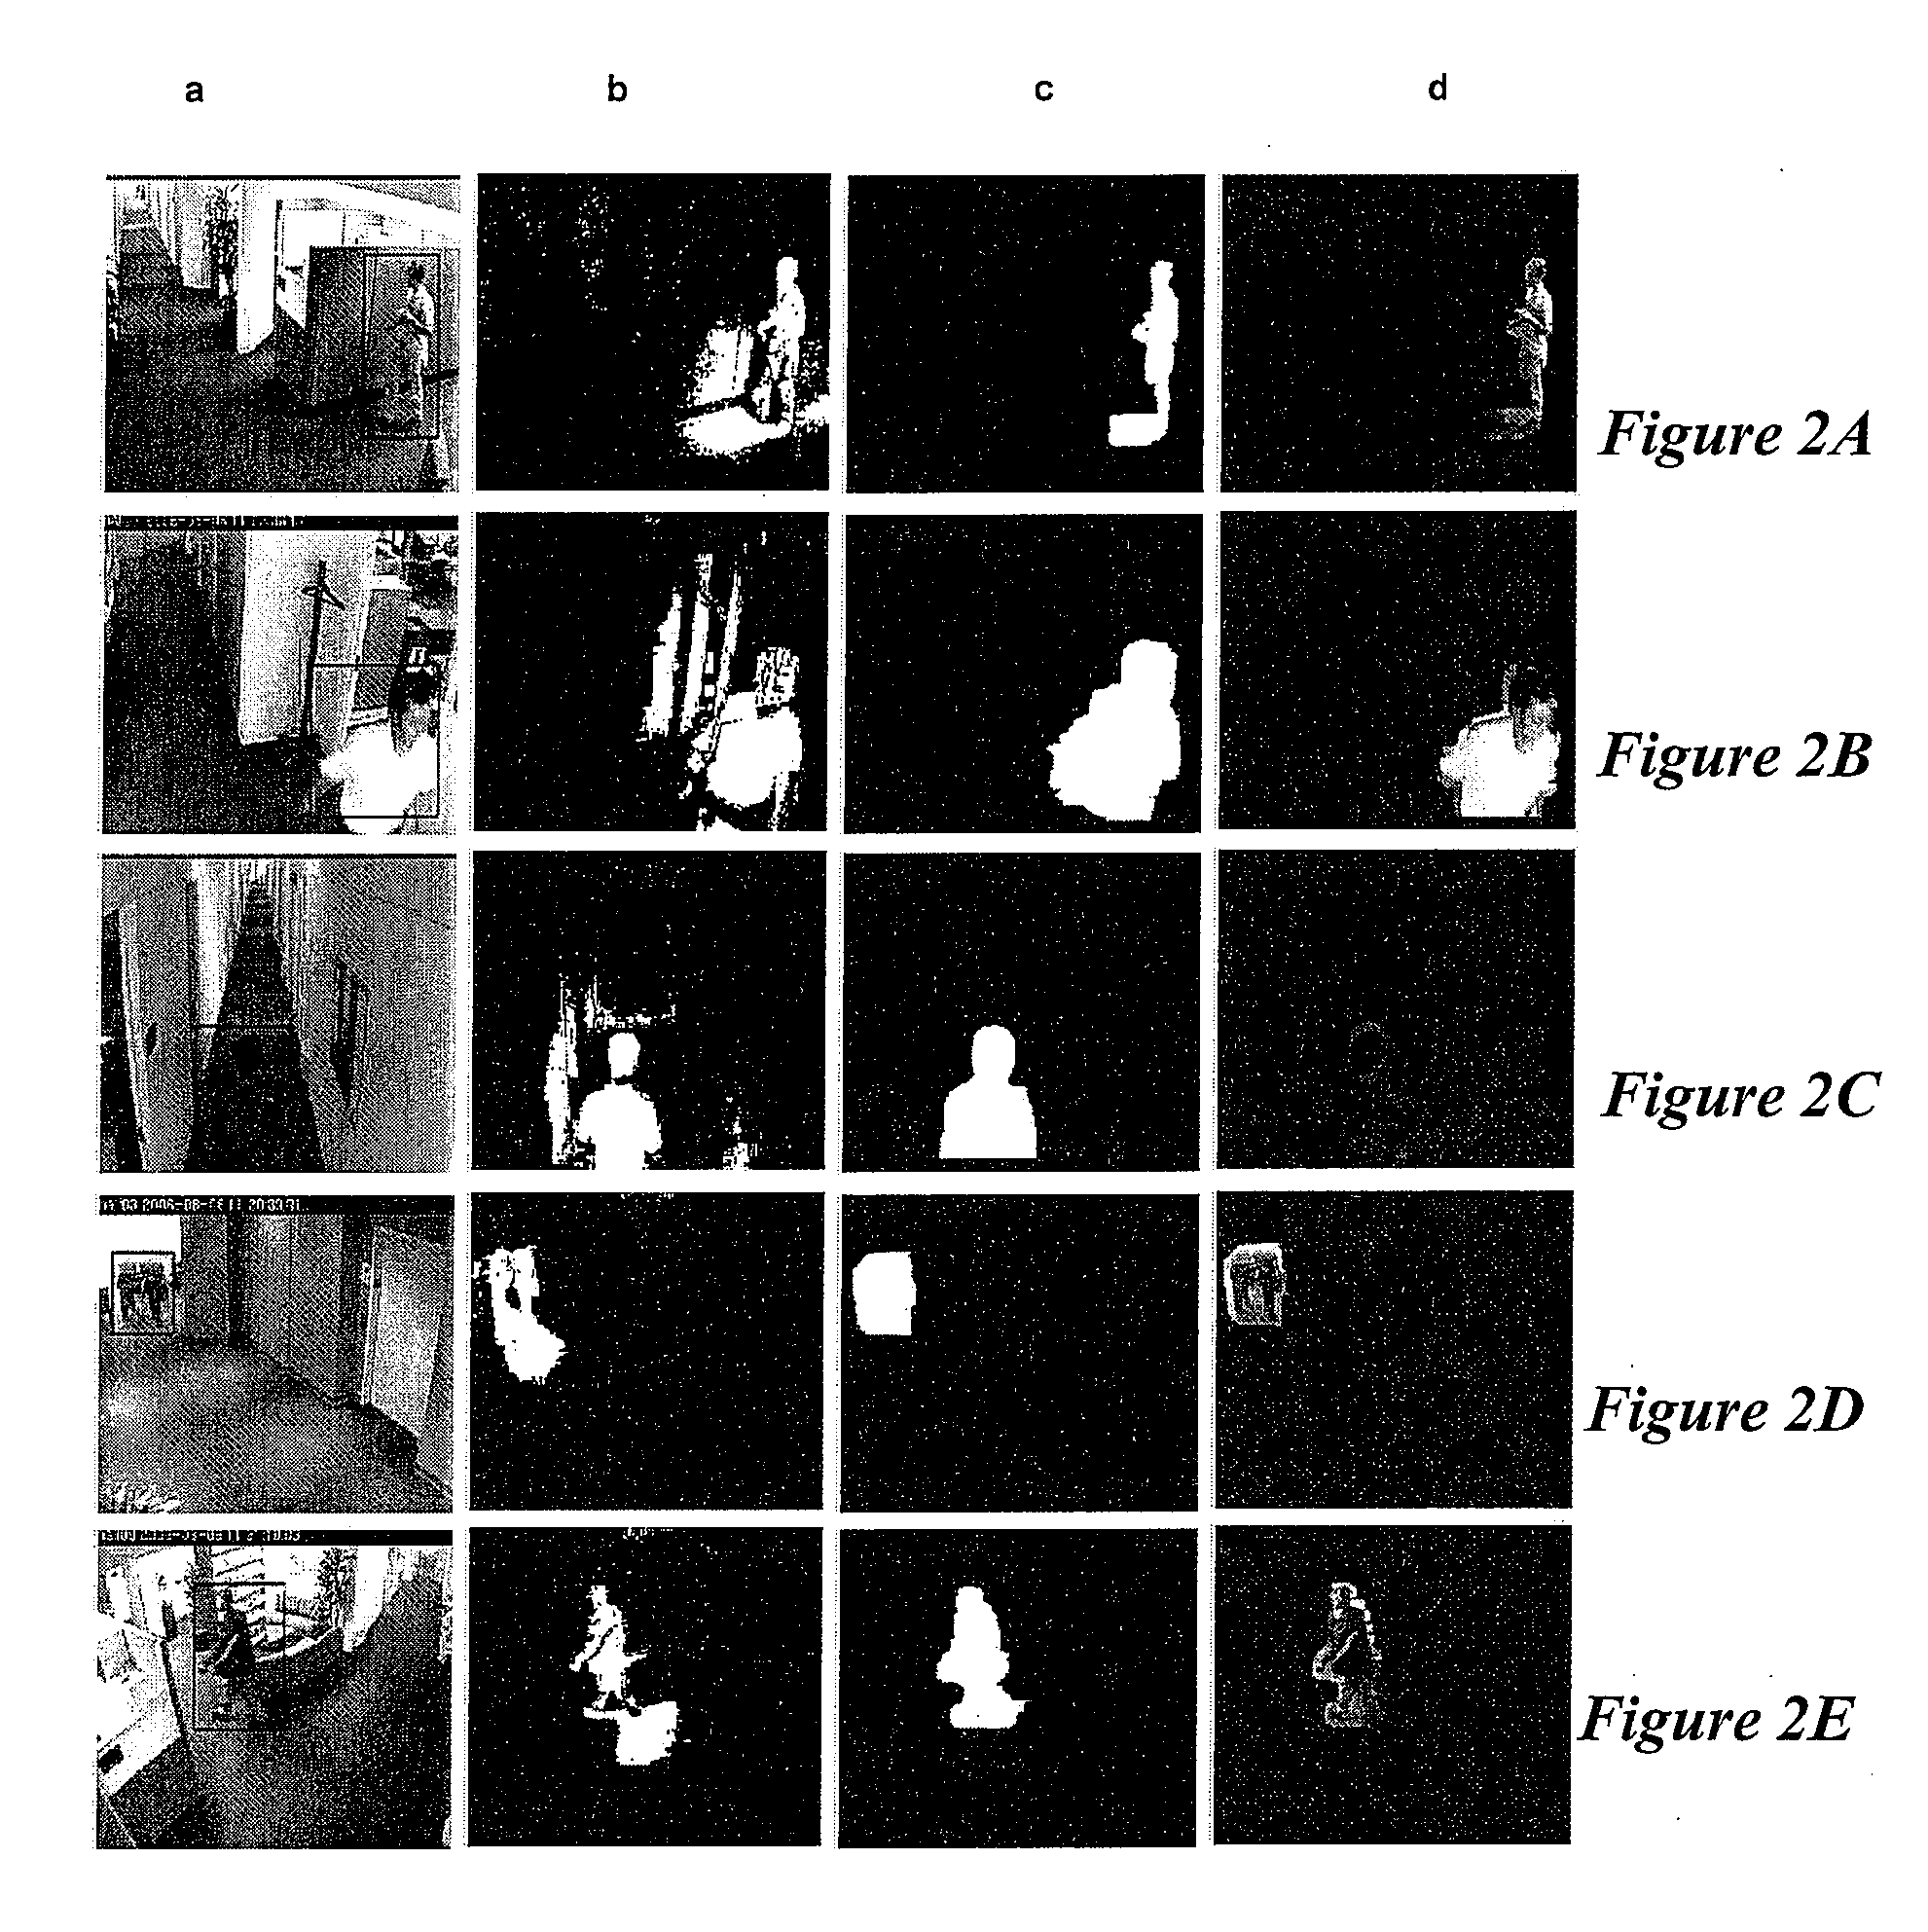 System and method for feature level foreground segmentation